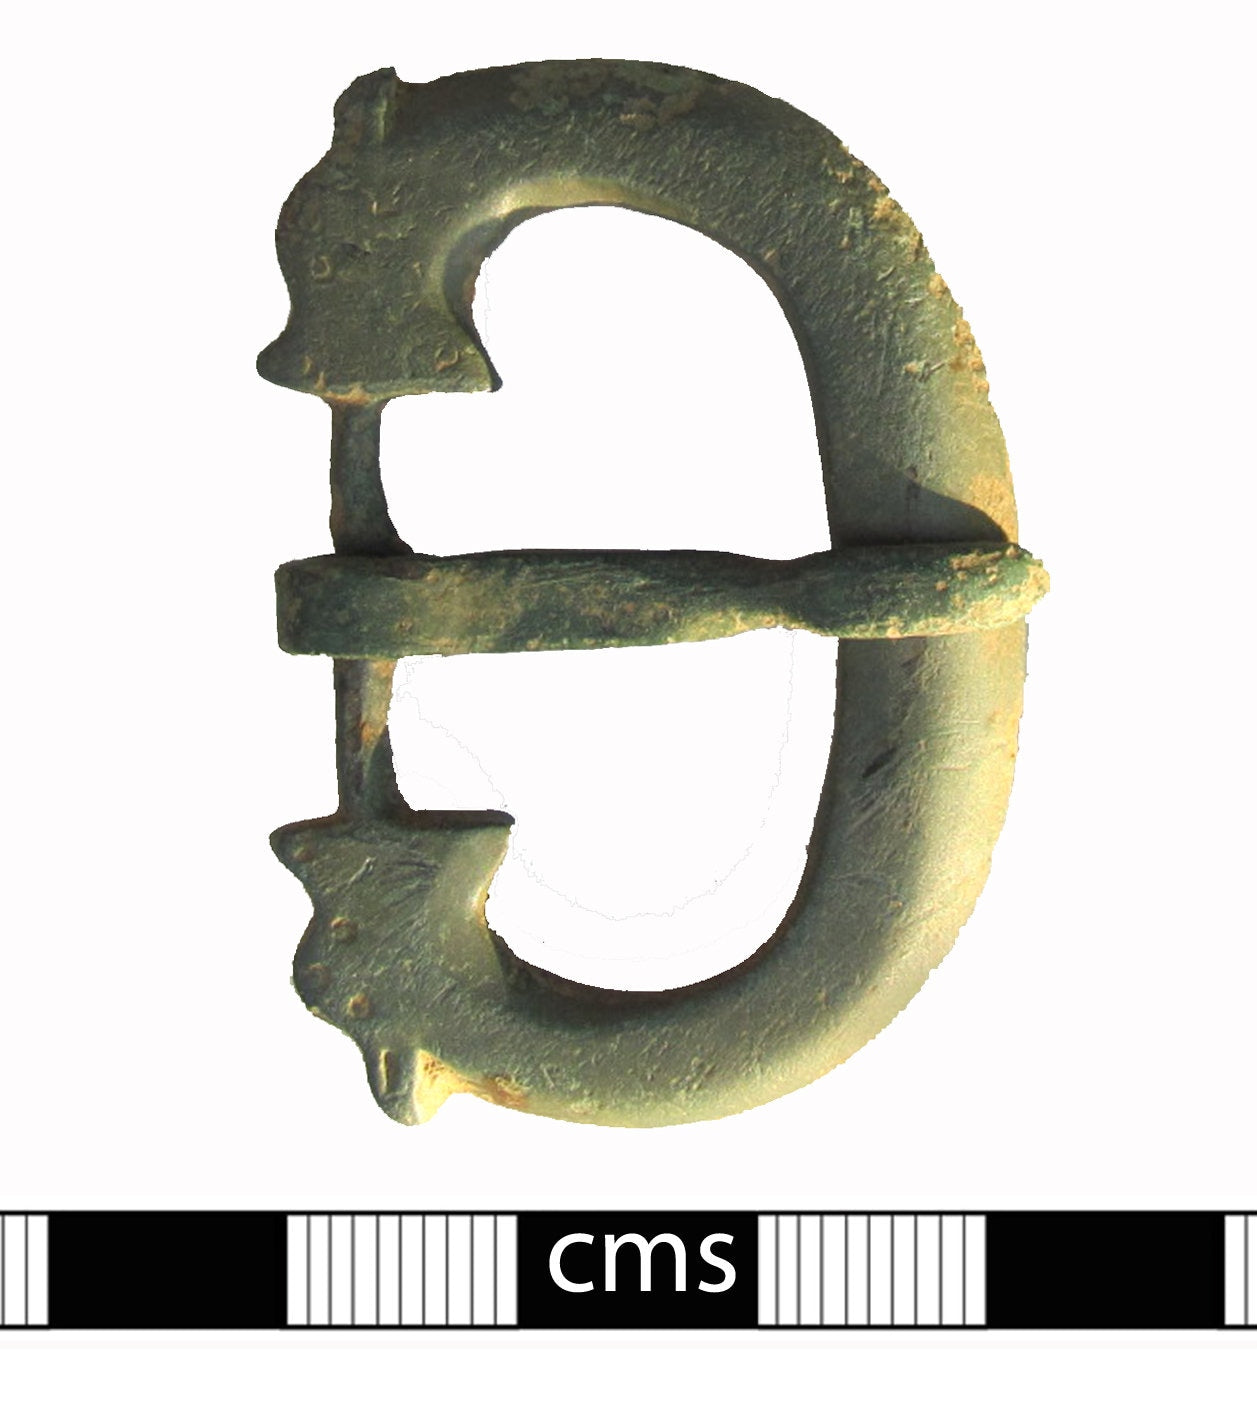 Roman or Rus Replica Buckle with animal head terminals